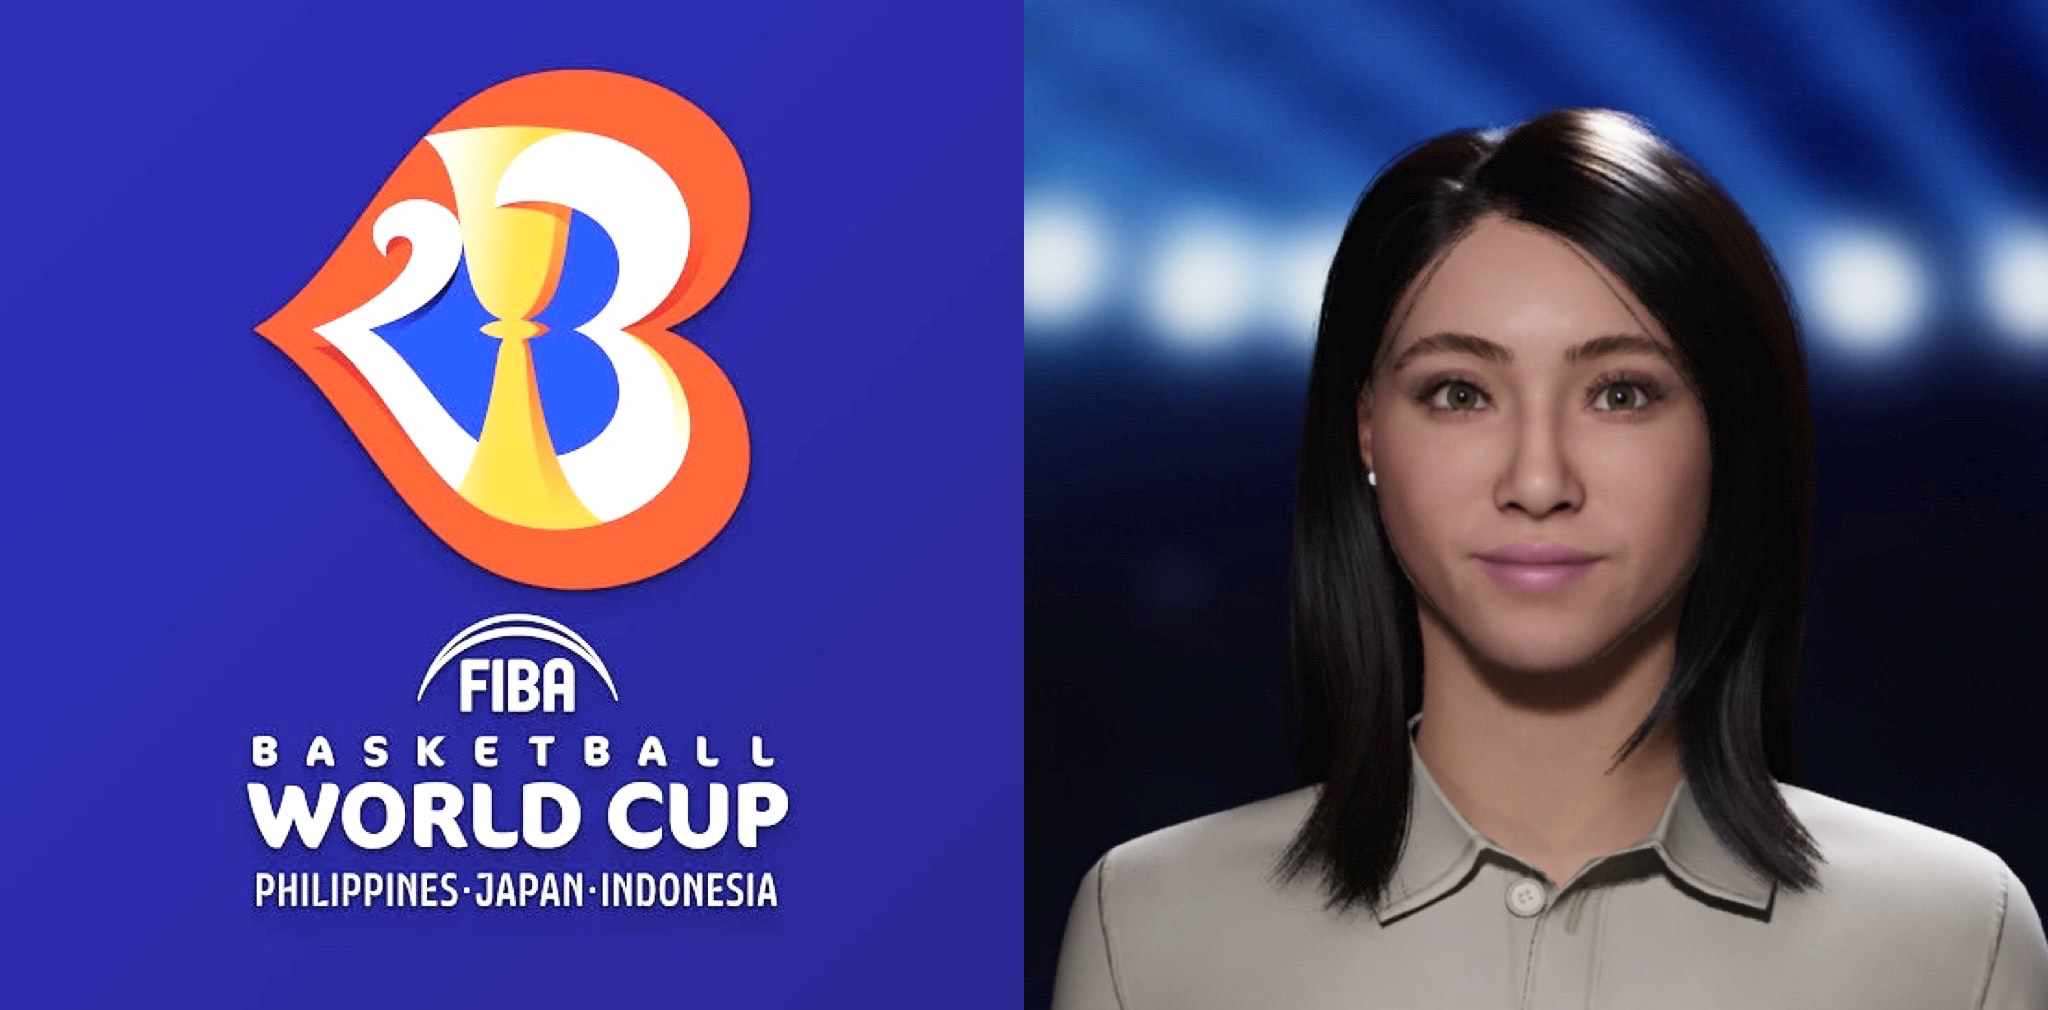 2023-FIBA-WC-Pearl FIBA World Cup broadcast lauded for world-class coverage 2023 FIBA World Cup Basketball Branded Content  - philippine sports news